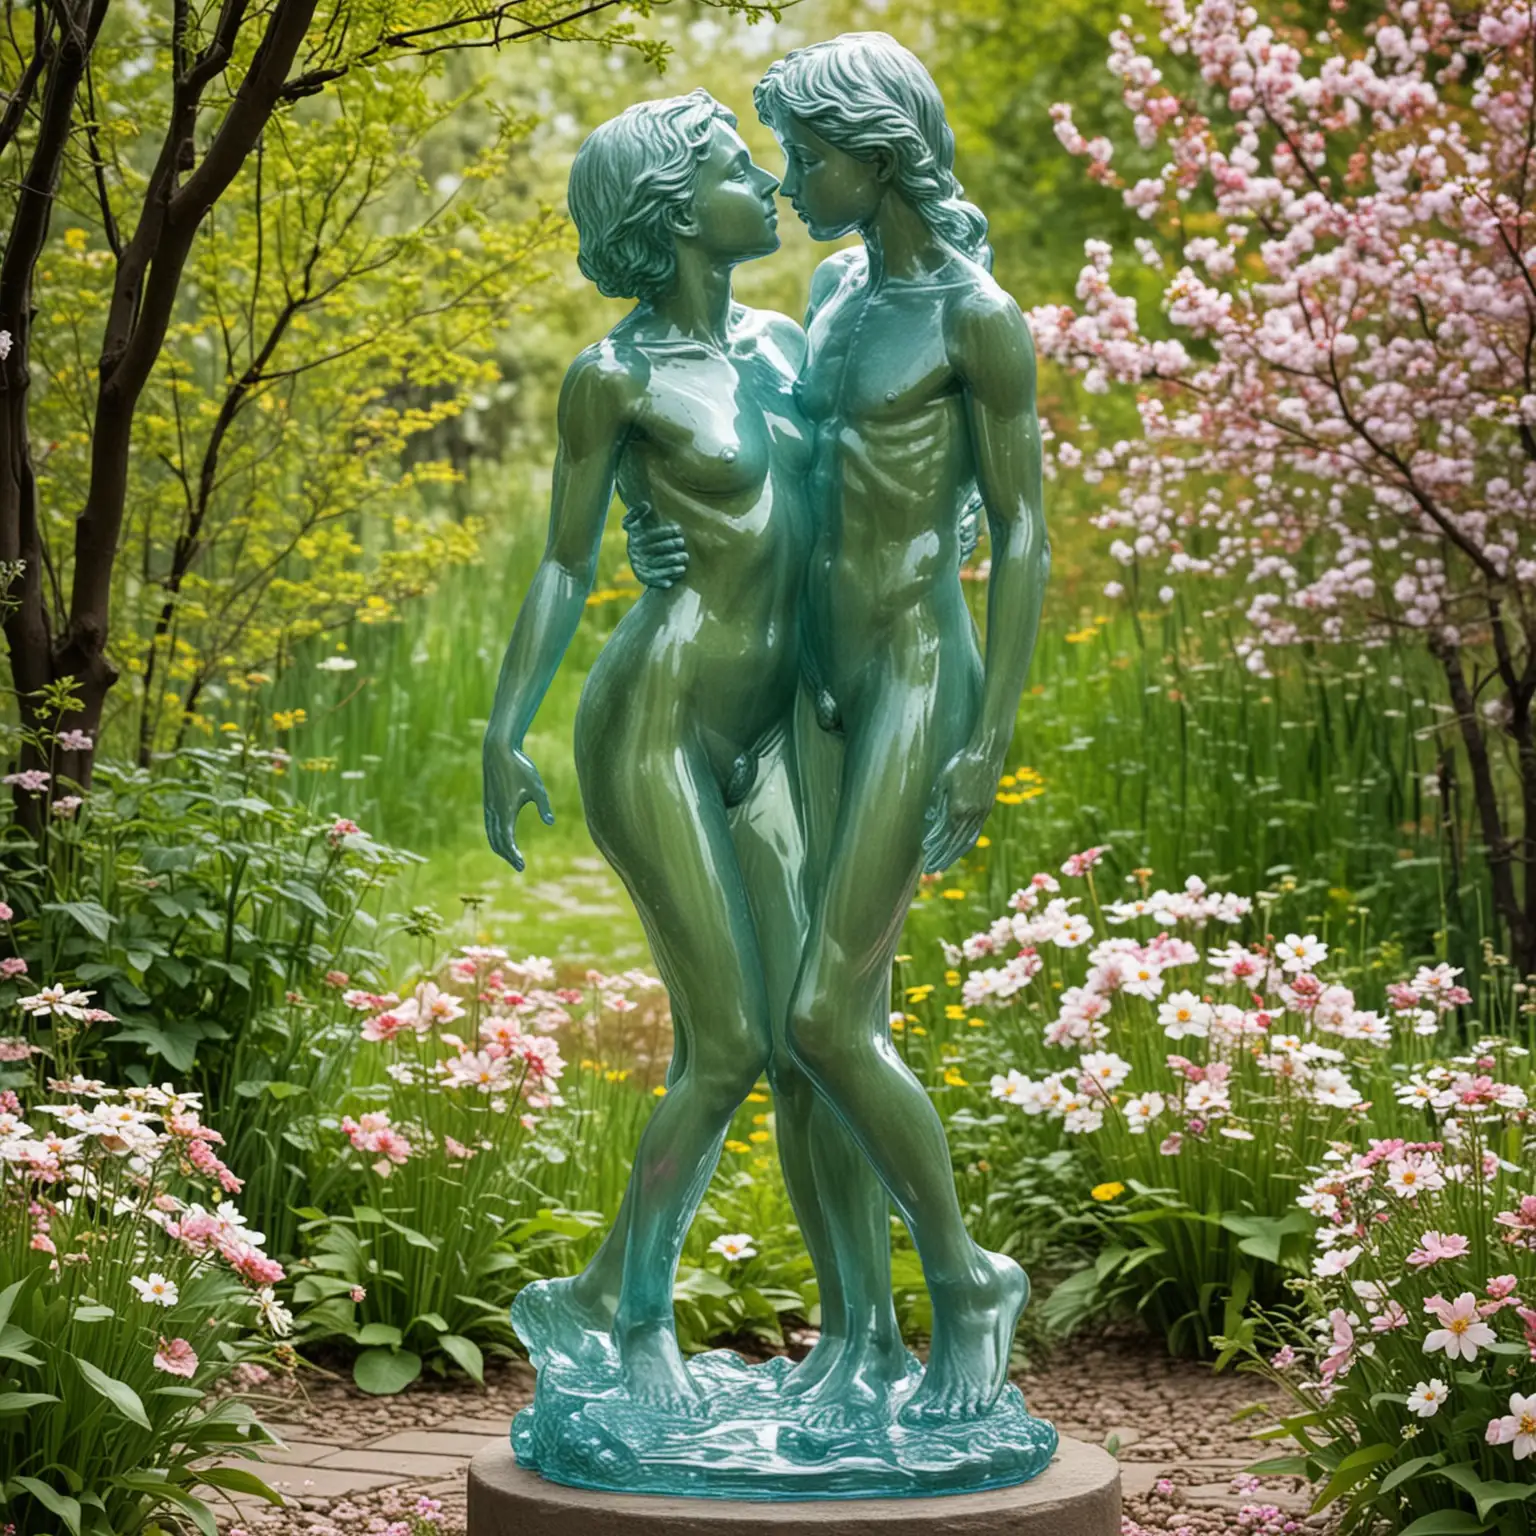 Naked Girl and Boy Embracing in Glass amidst Blossoming Garden